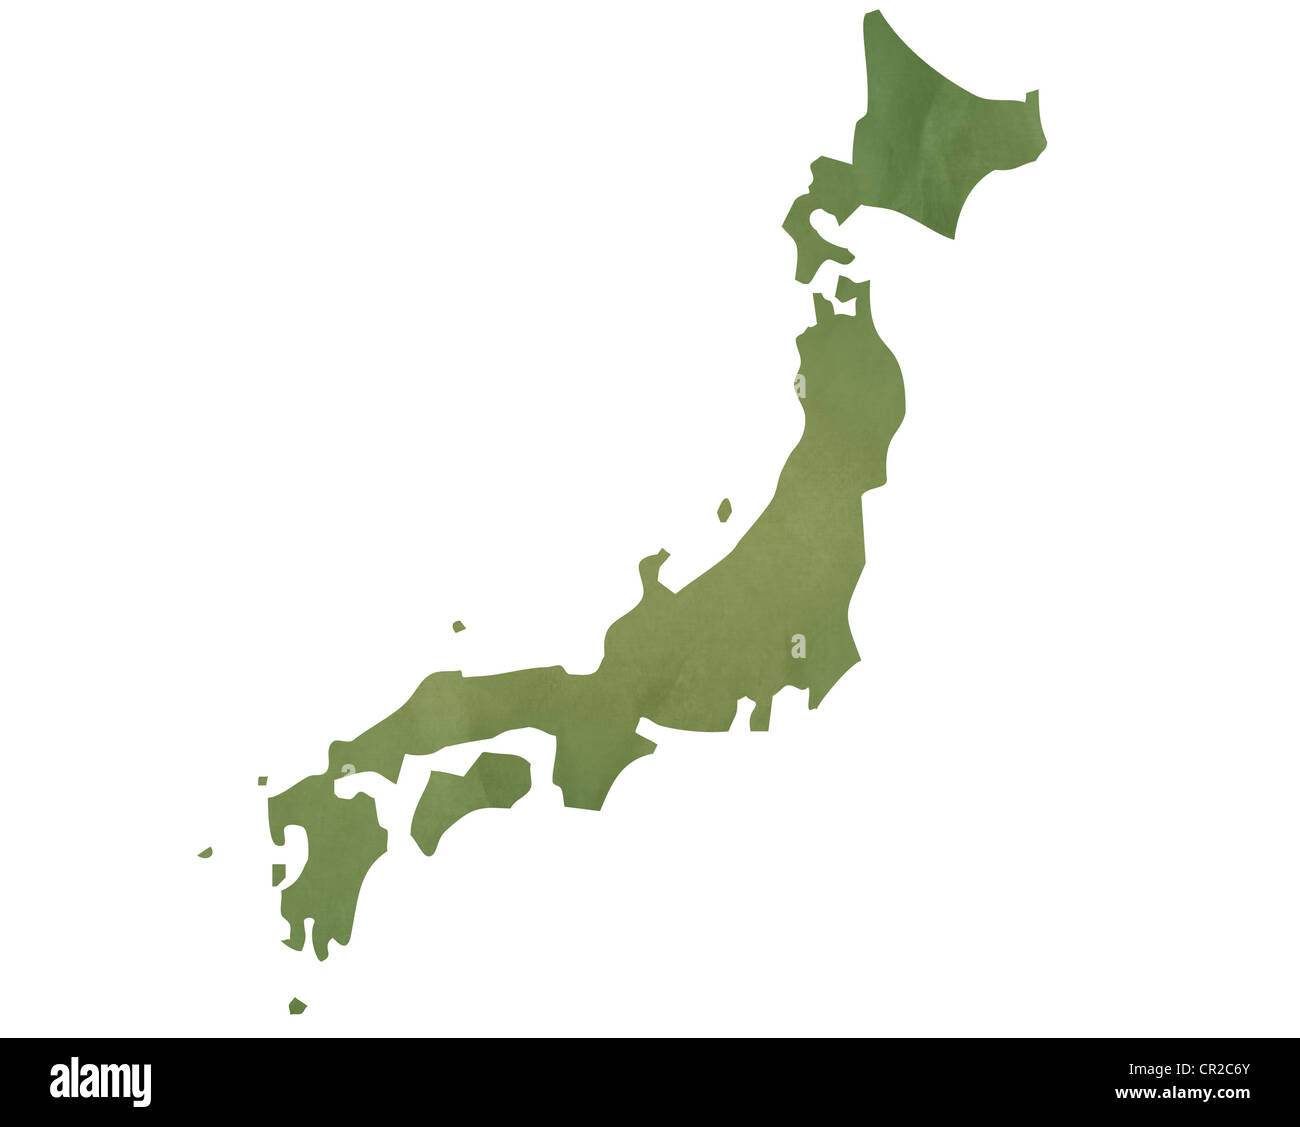 Old green map of Japan in textured green paper, isolated on white background. Stock Photo